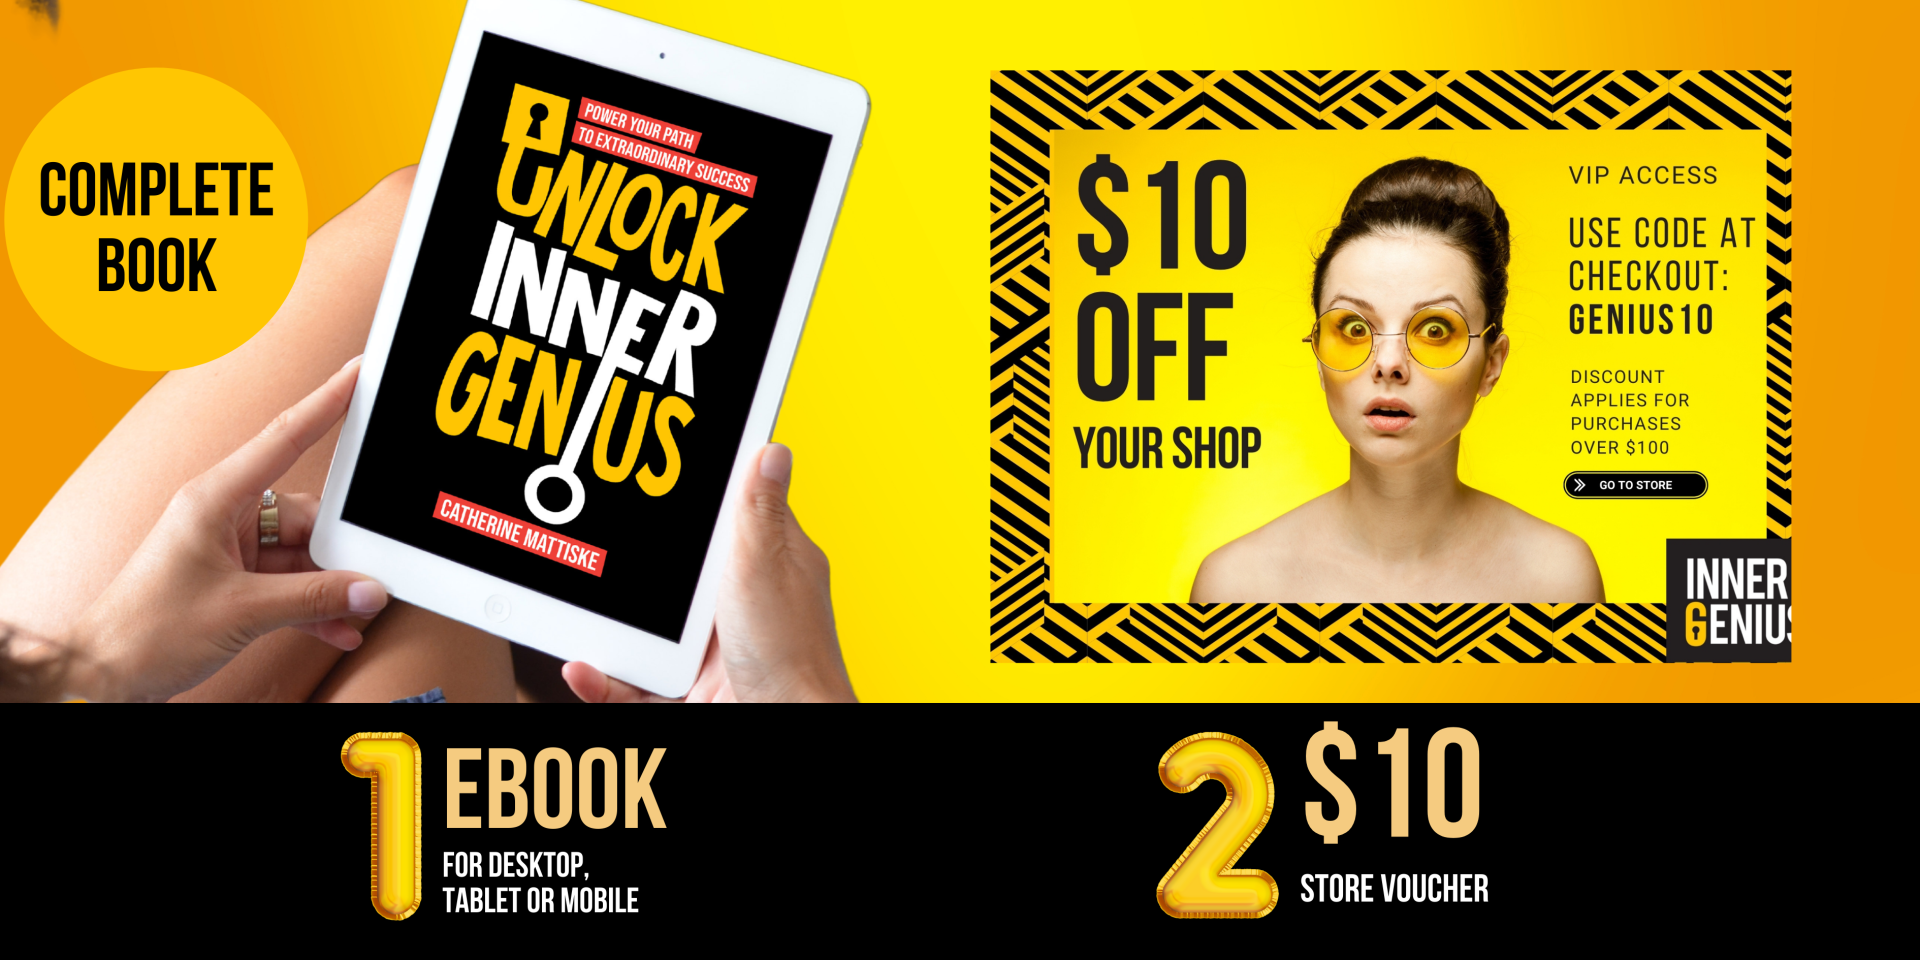 Complete eBook and $10 voucher